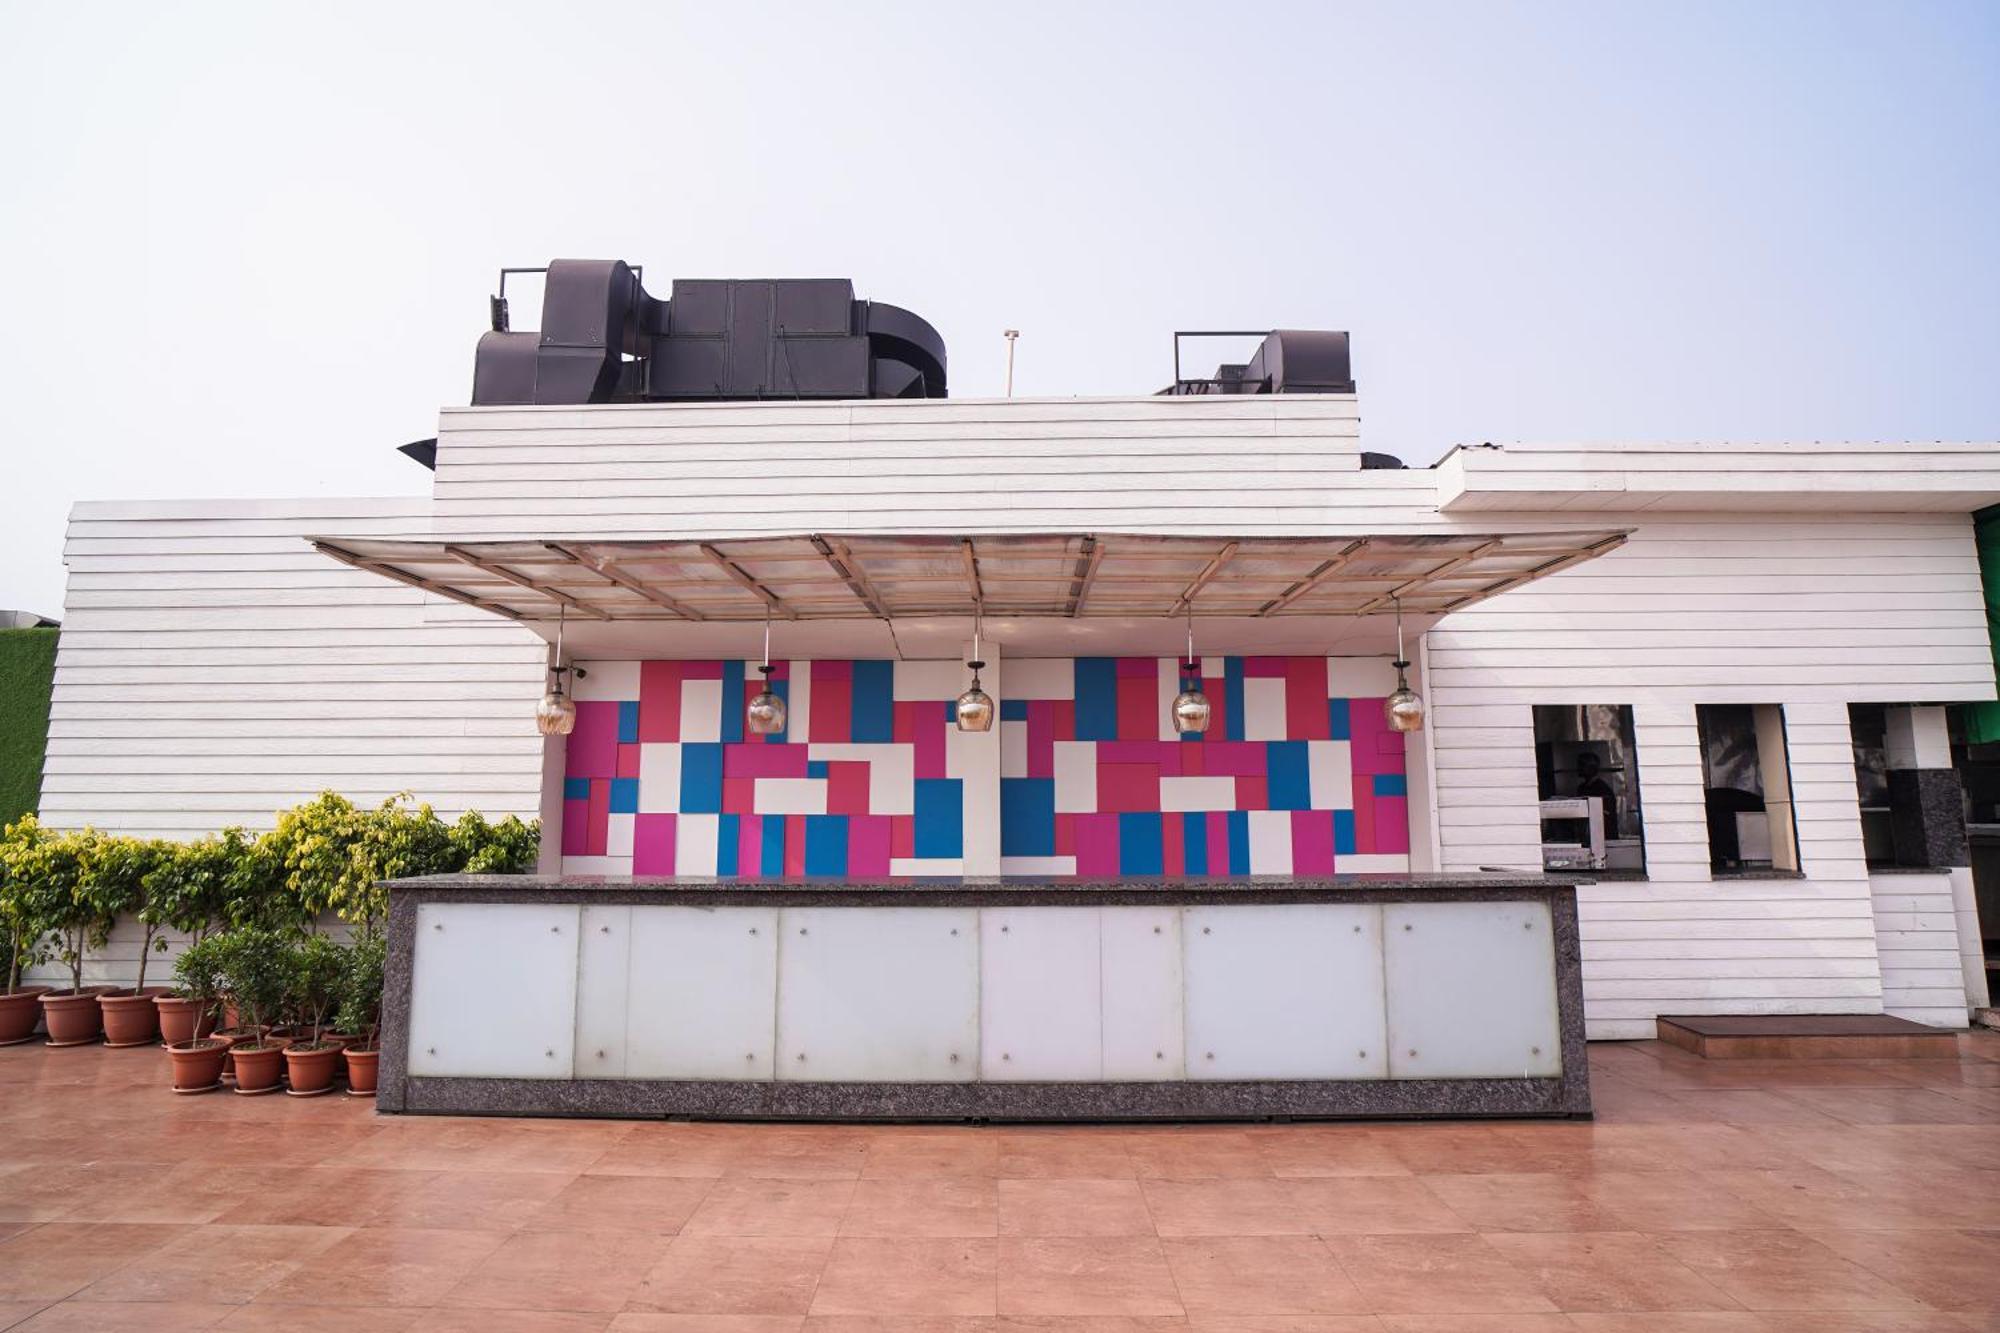 The Alcor Hotel Jamshedpur Exterior photo